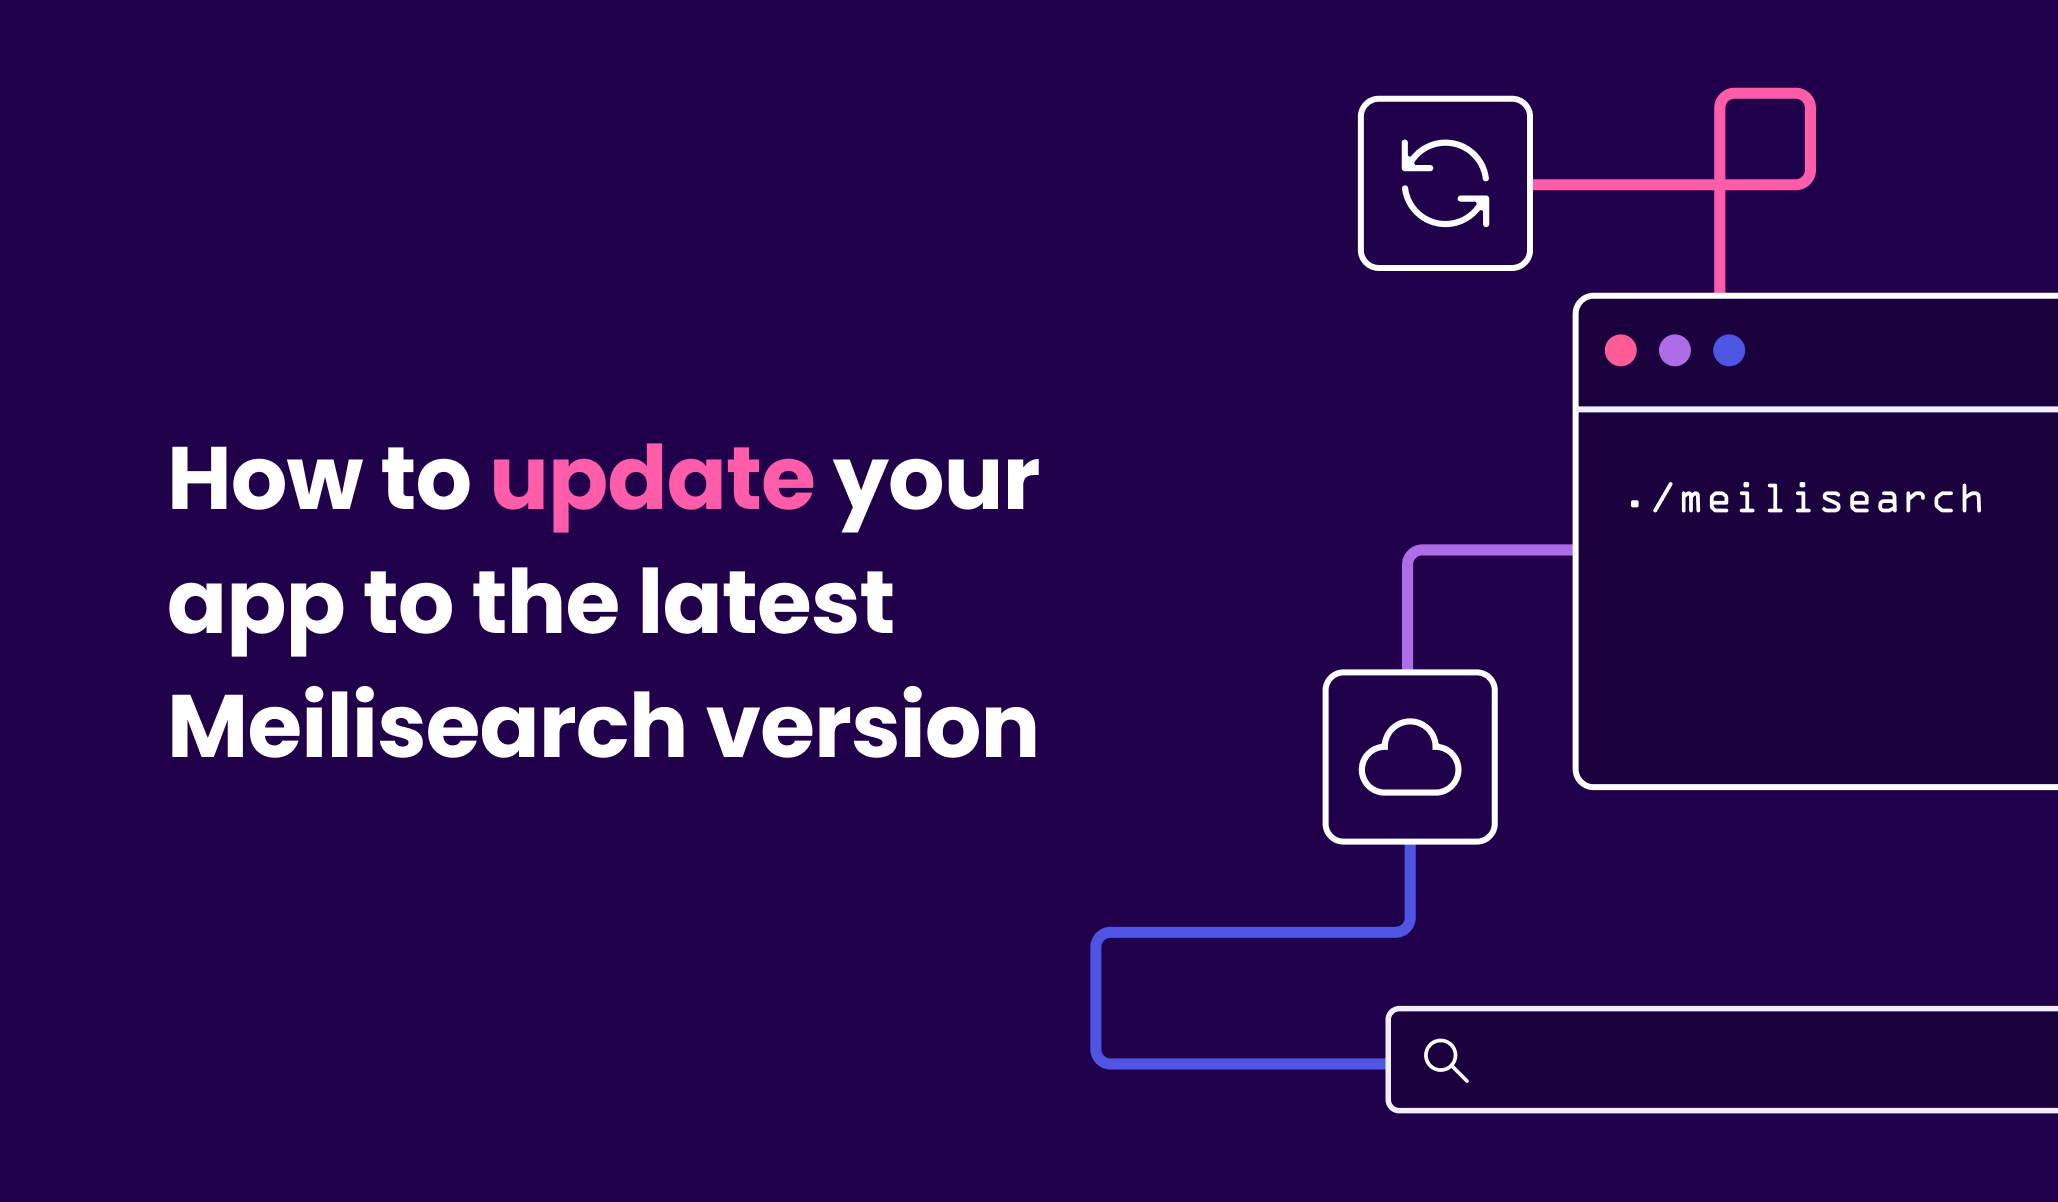 How to update your app to the latest Meilisearch version